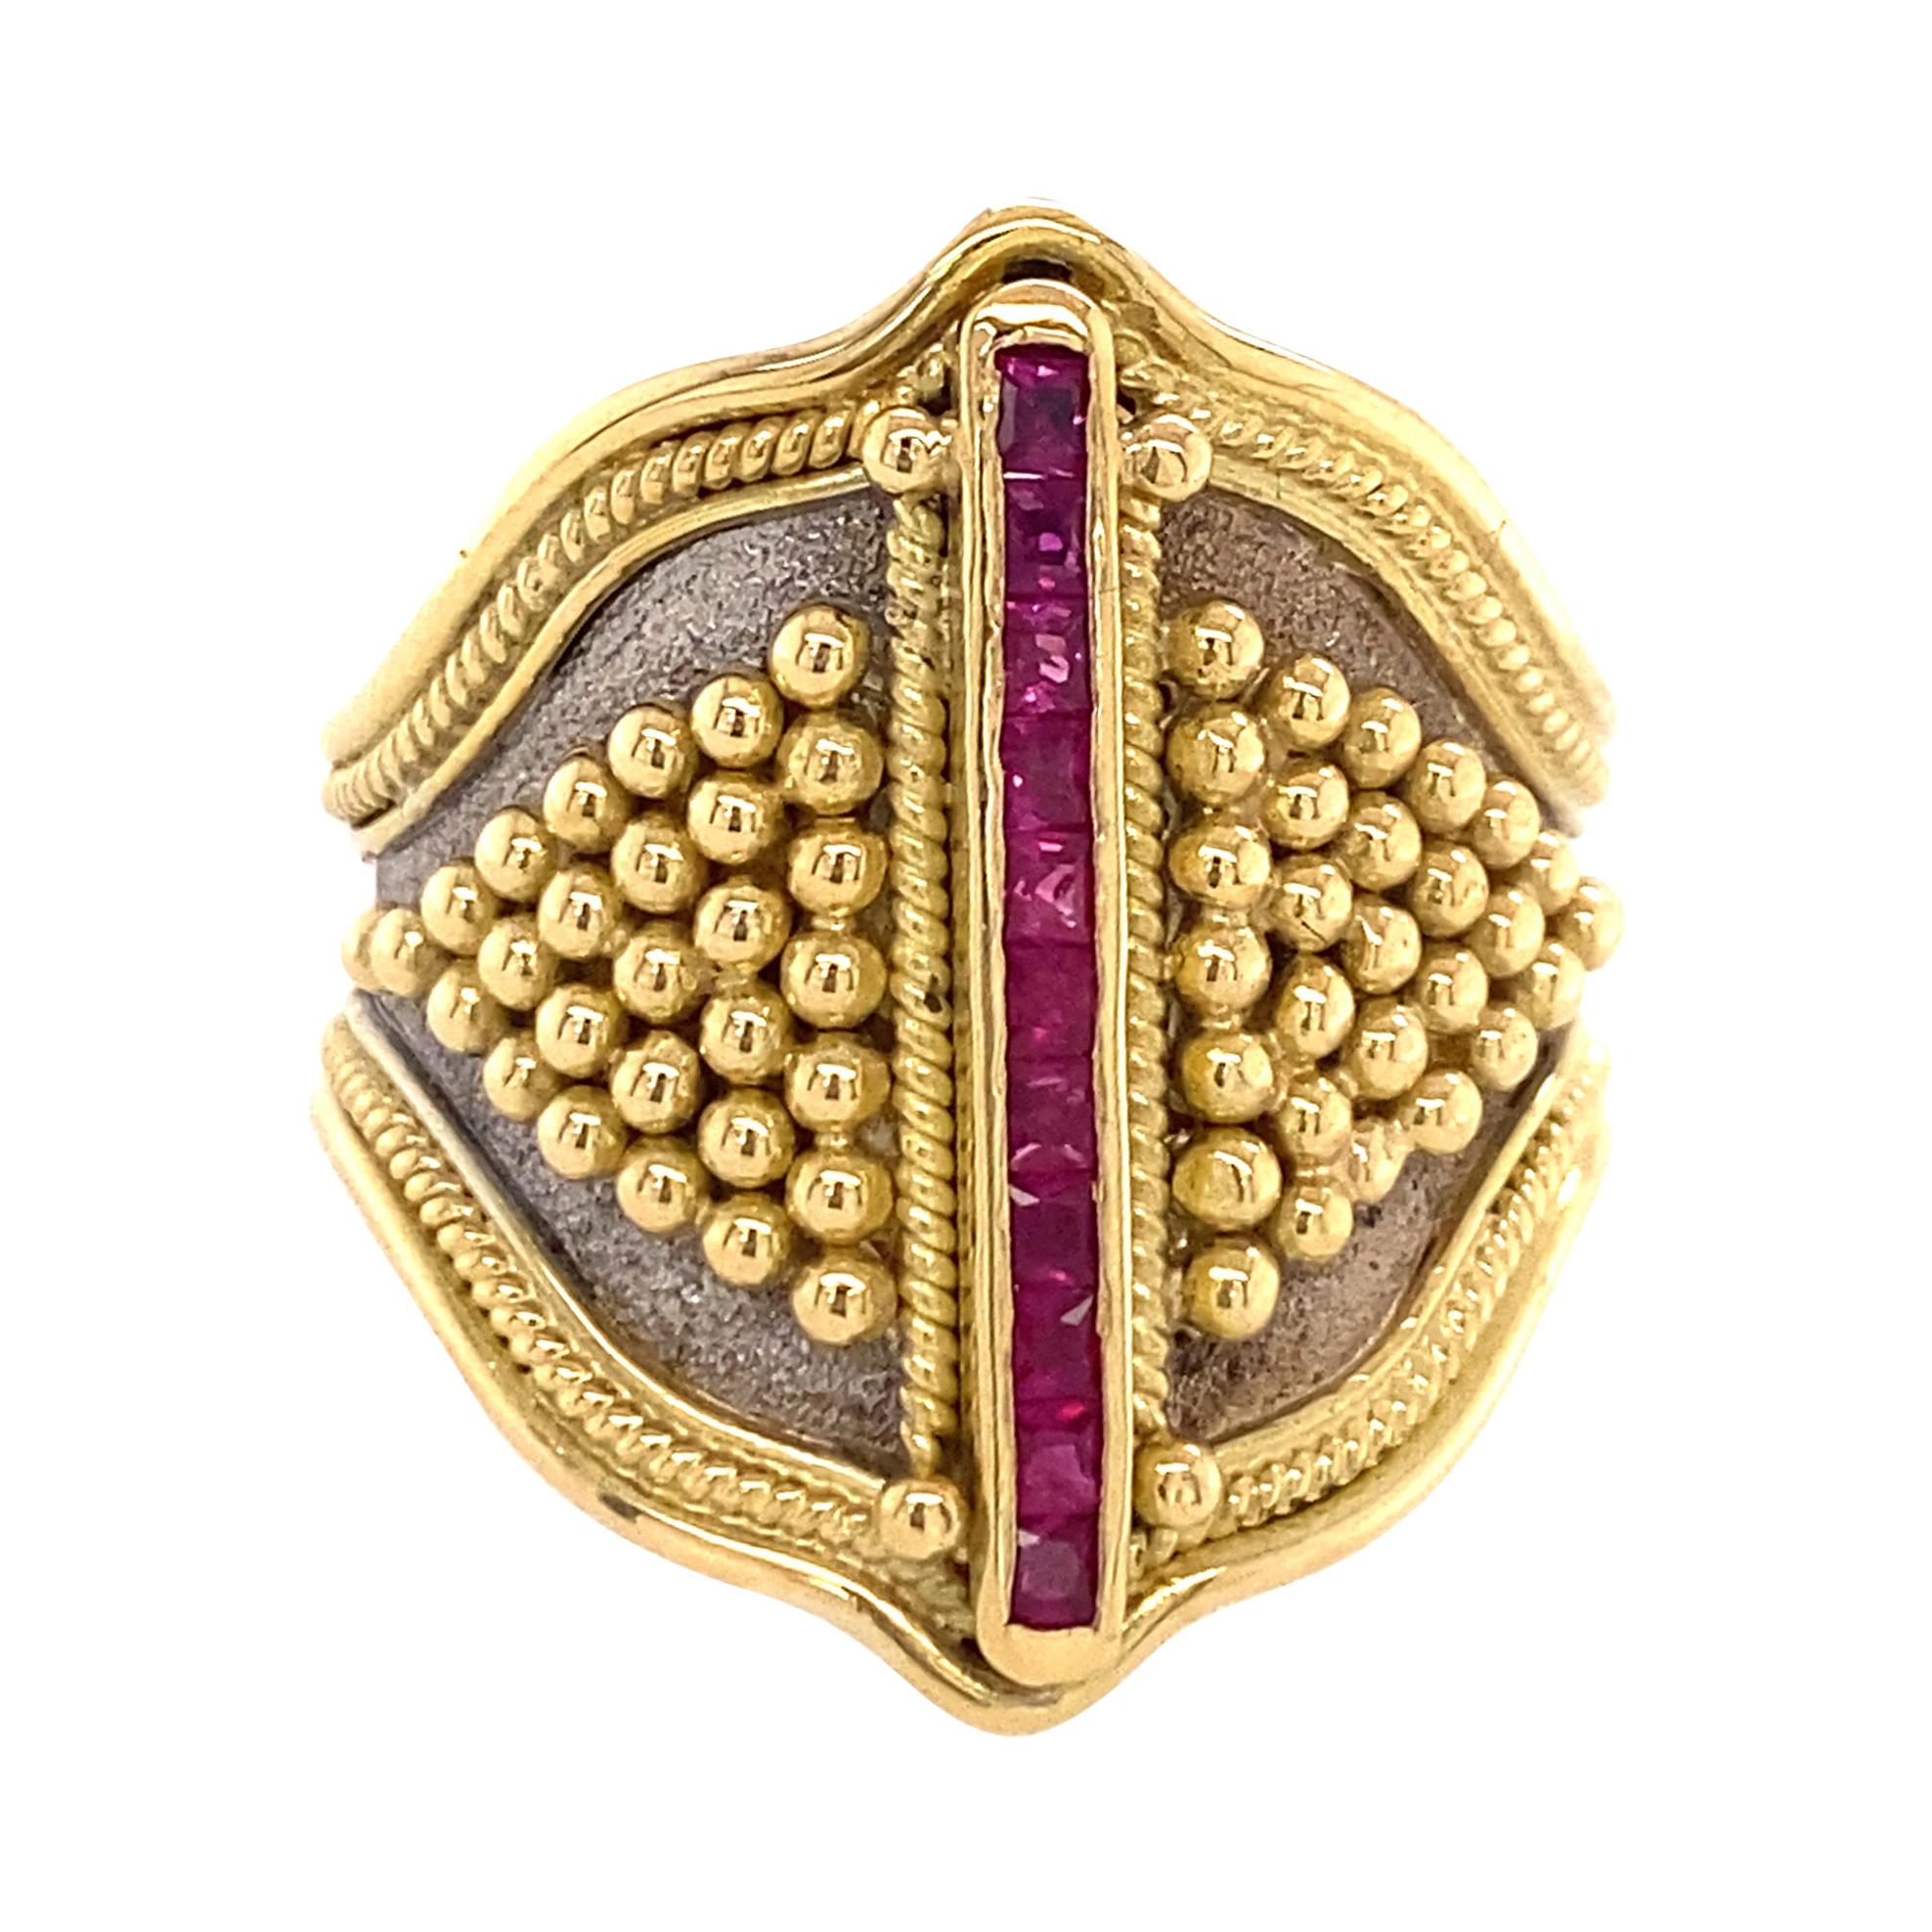 Cigar Band or Shield Ring in 18K Gold with Carré-Cut Rubies & Granulation Detail